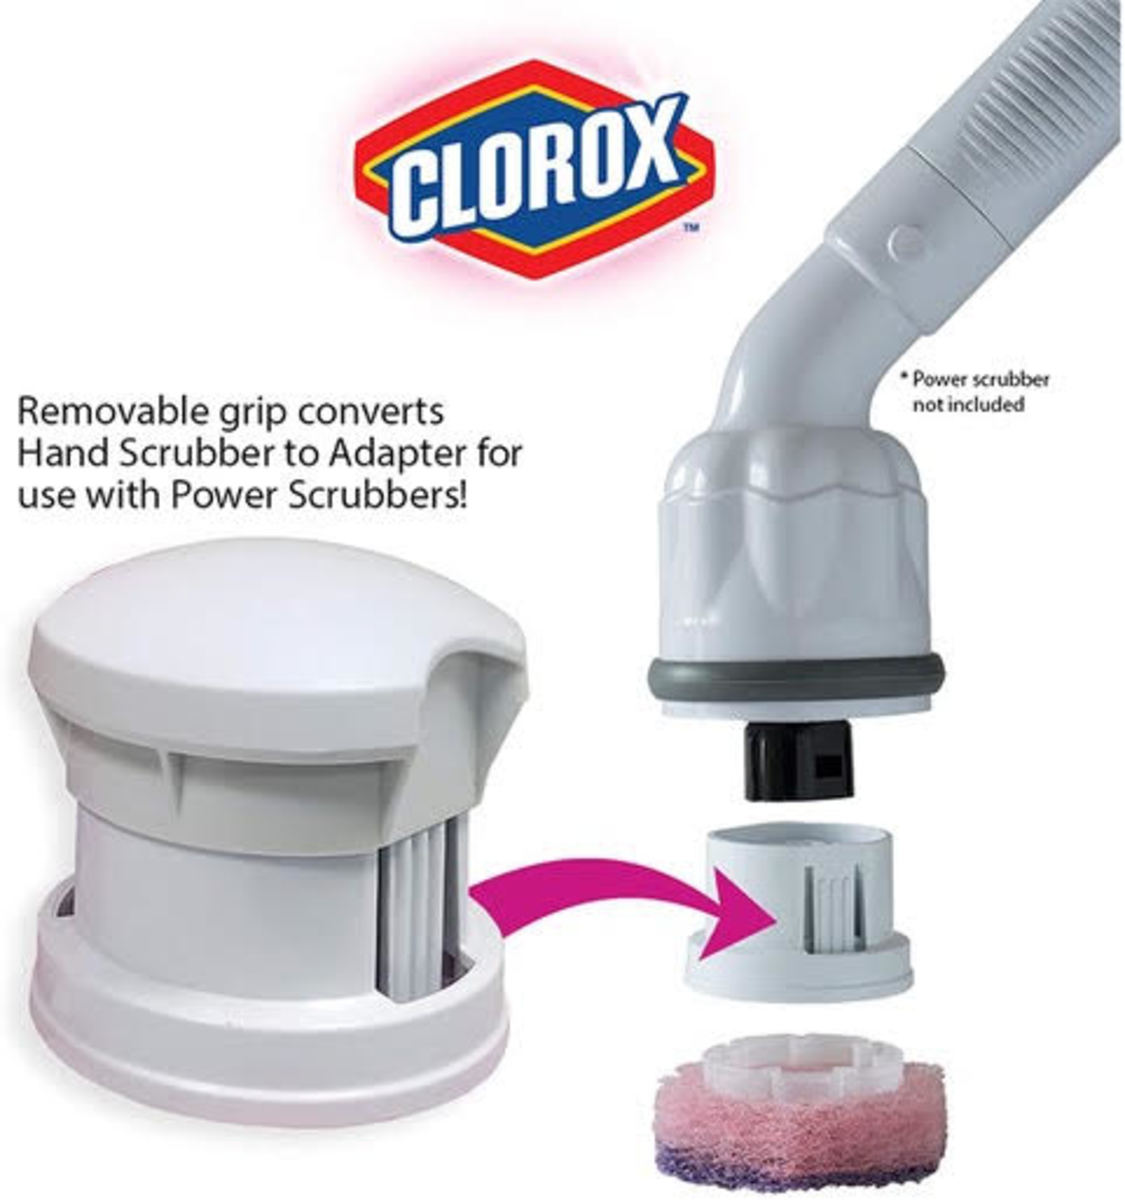 Why You Need to Up Your Cleaning Game with Clorox